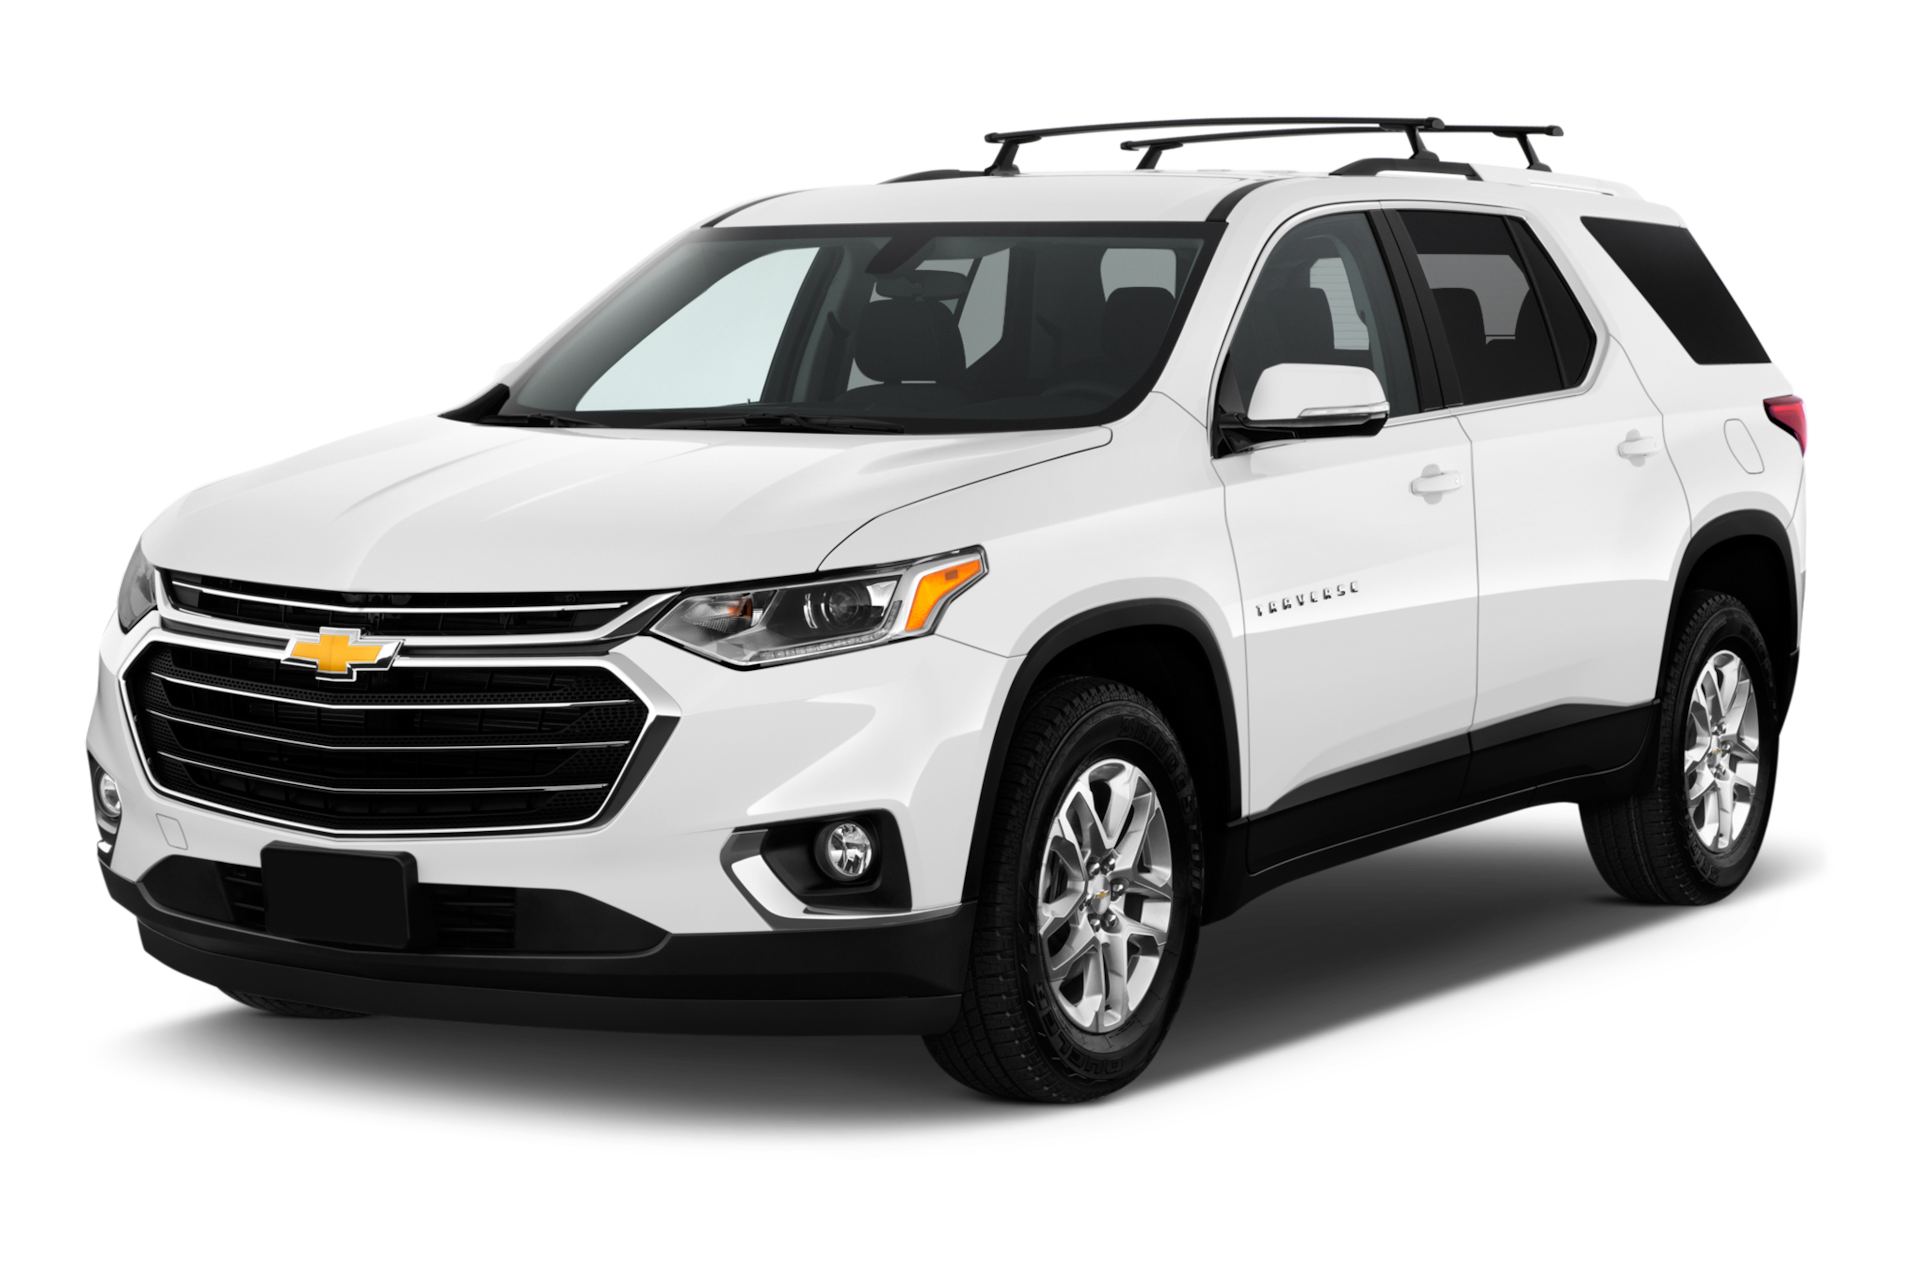 2018 Chevrolet Traverse Prices, Reviews, and Photos - MotorTrend